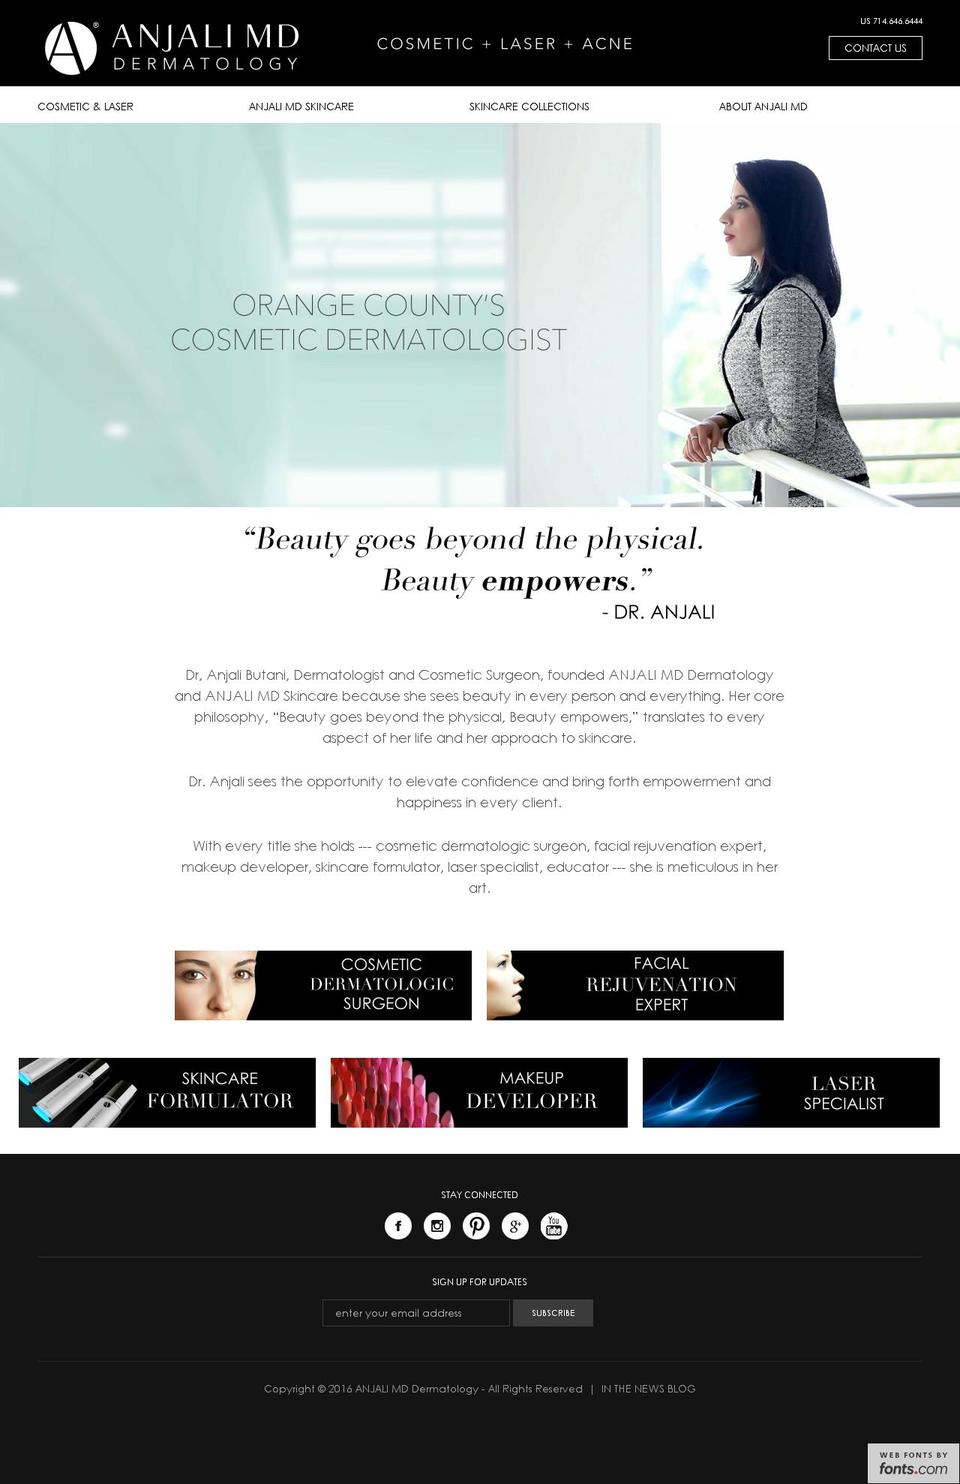 Anjali MD Site 2016 Shopify theme site example orangelasers.com